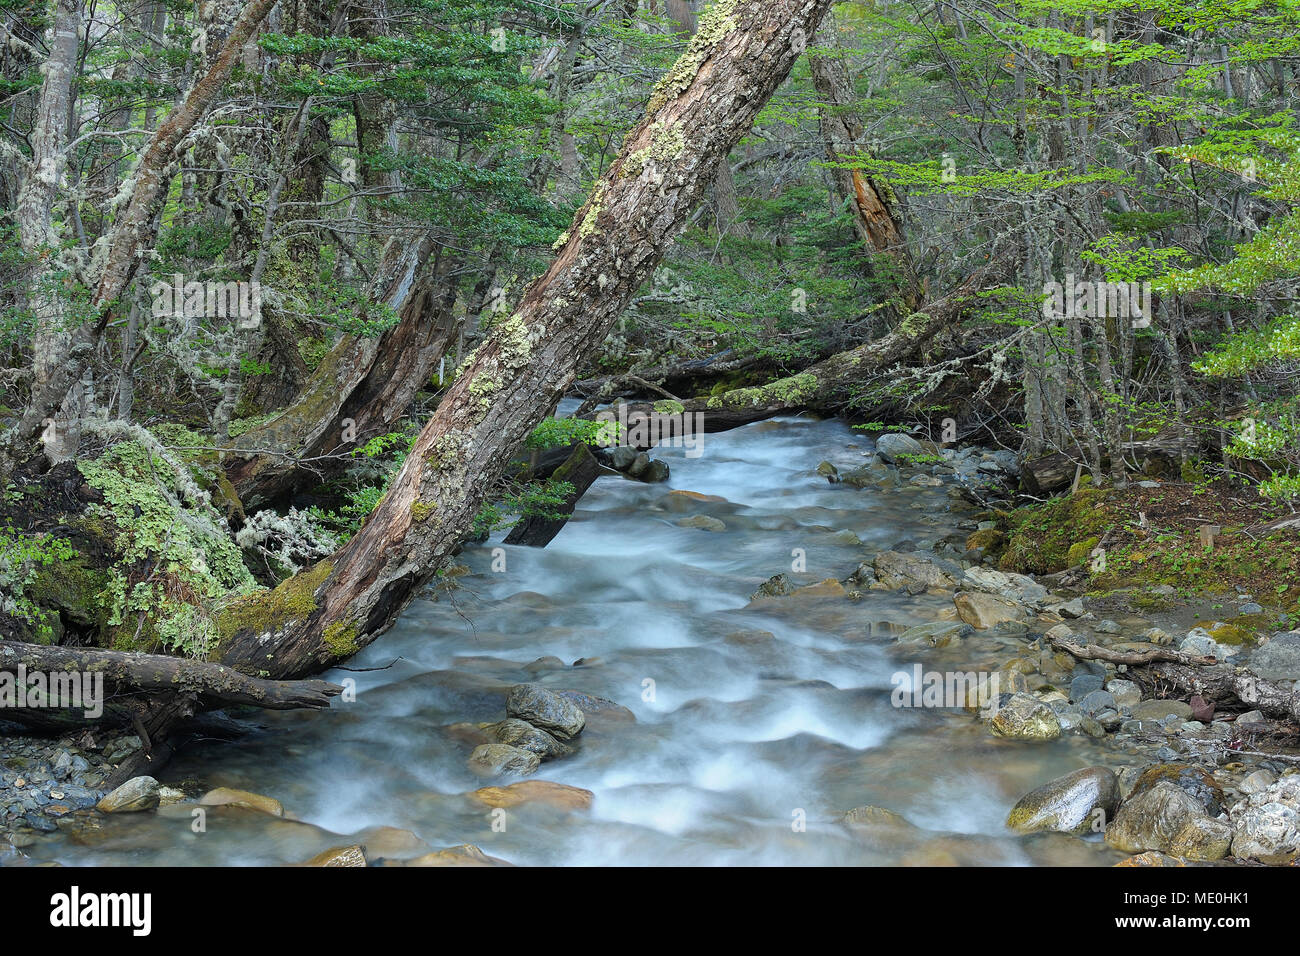 Rushing water of a forest stream at Ushuaia in Tierra del Fuego National Park, Tierra Del Fuego, Argentina Stock Photo